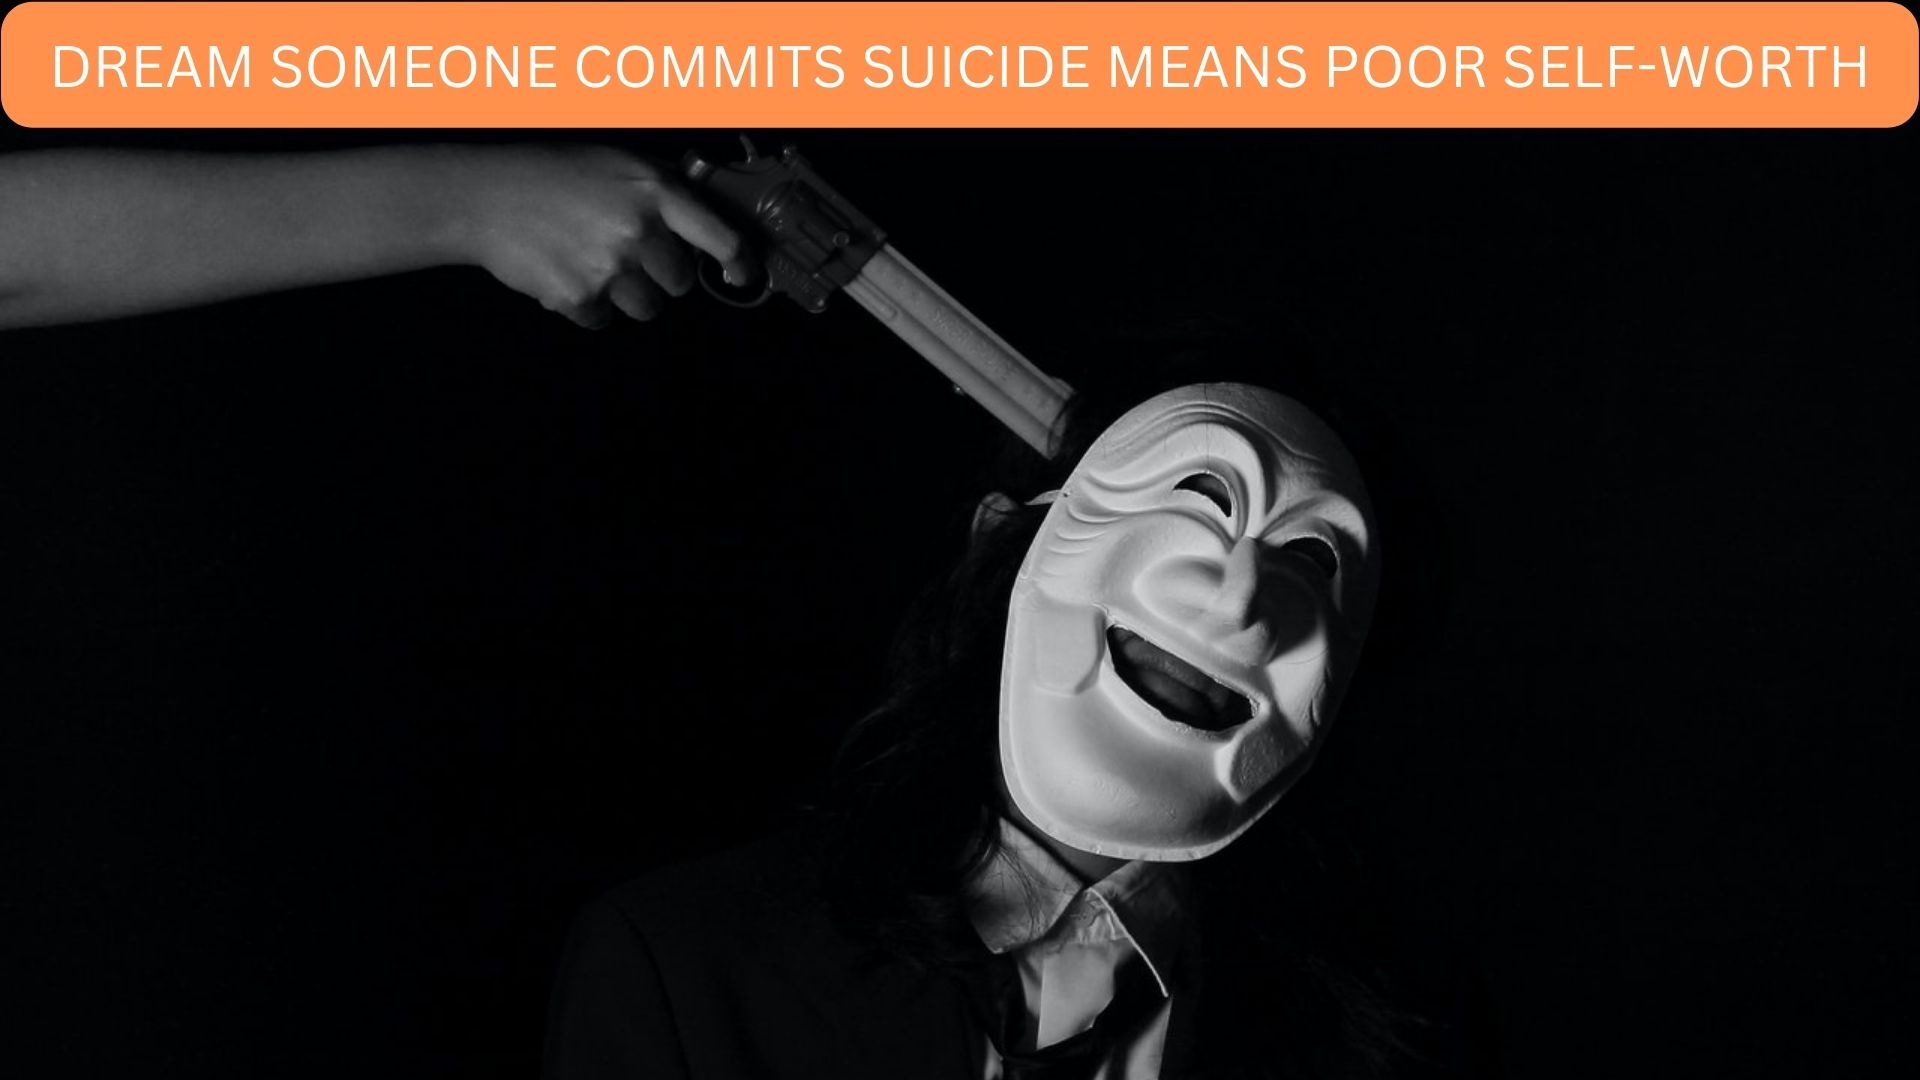 Dream Someone Commits Suicide Means Poor Self-Worth